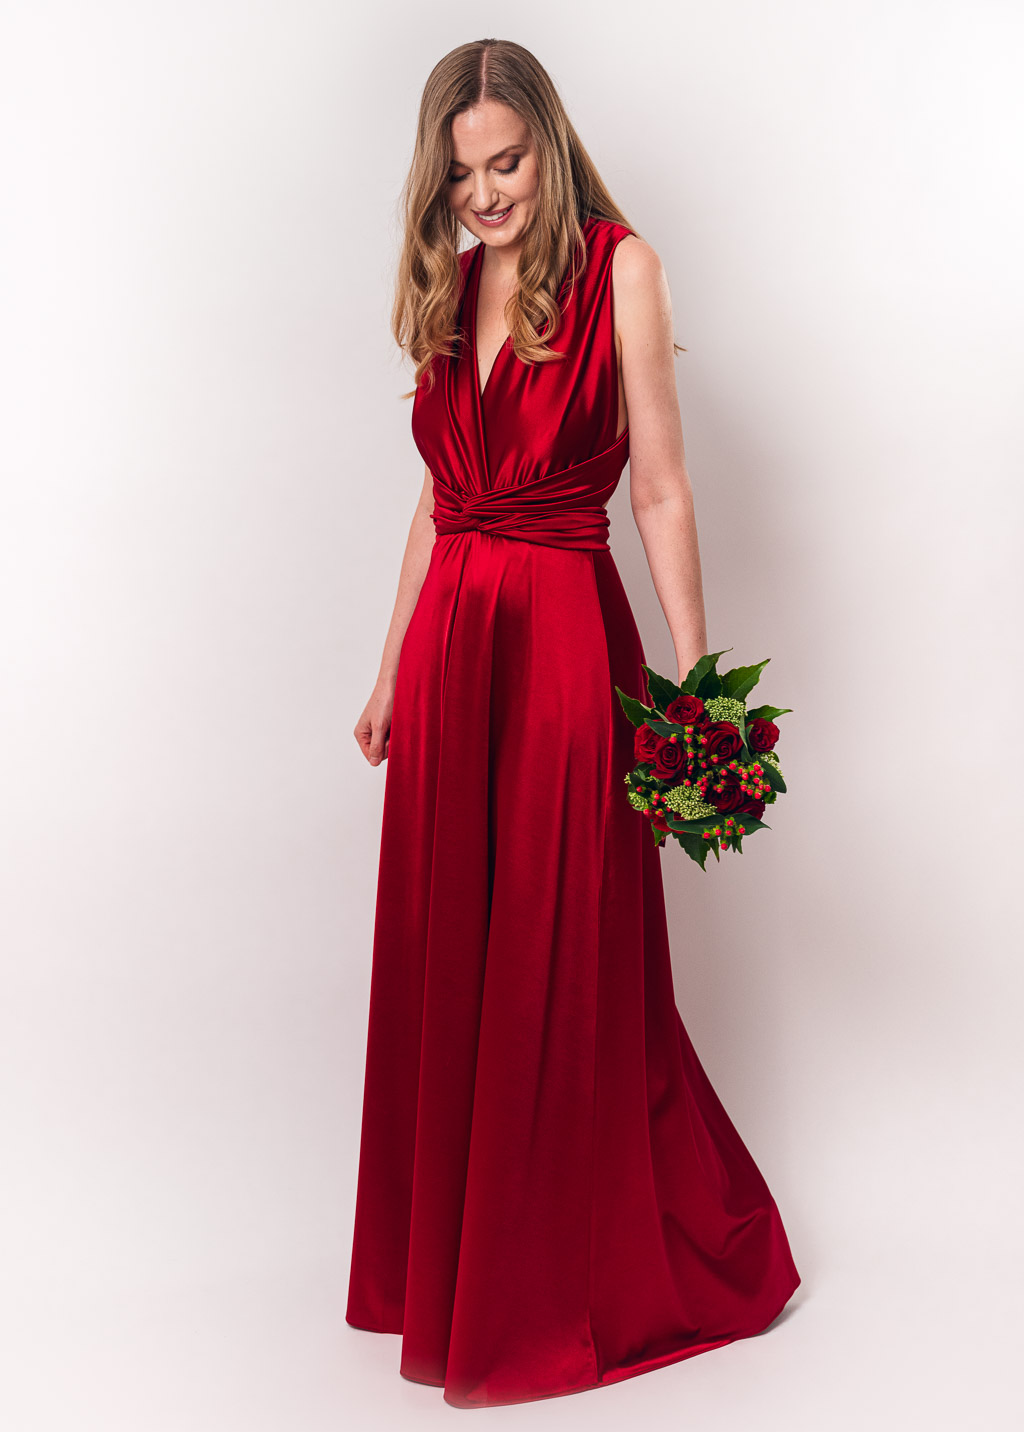 Red burgundy luxury satin infinity dress or jumpsuit